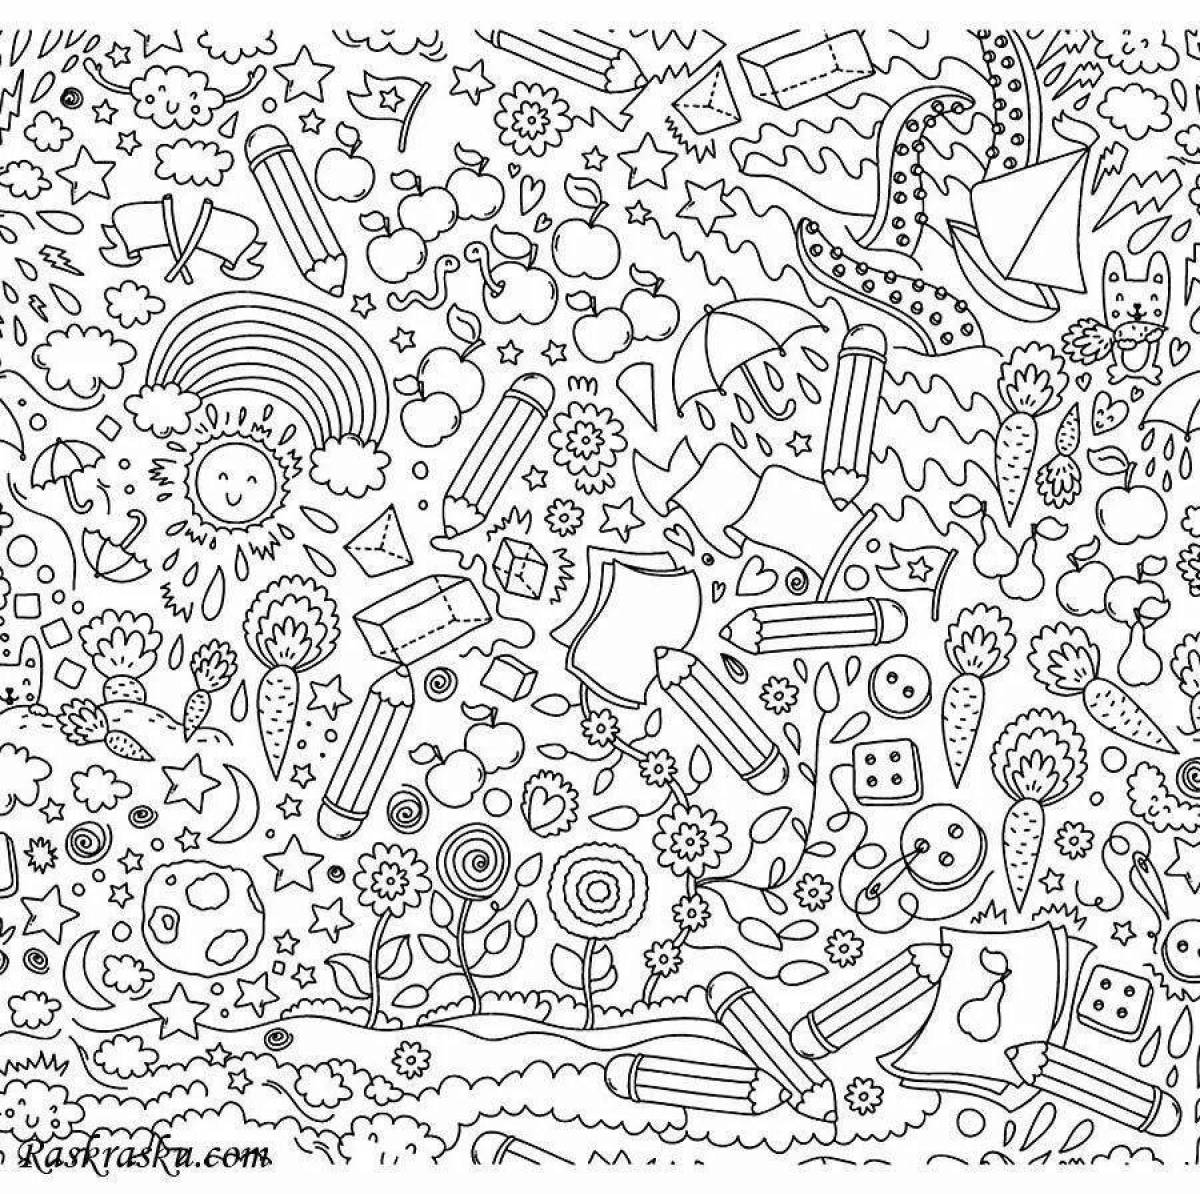 Glossy coloring page background